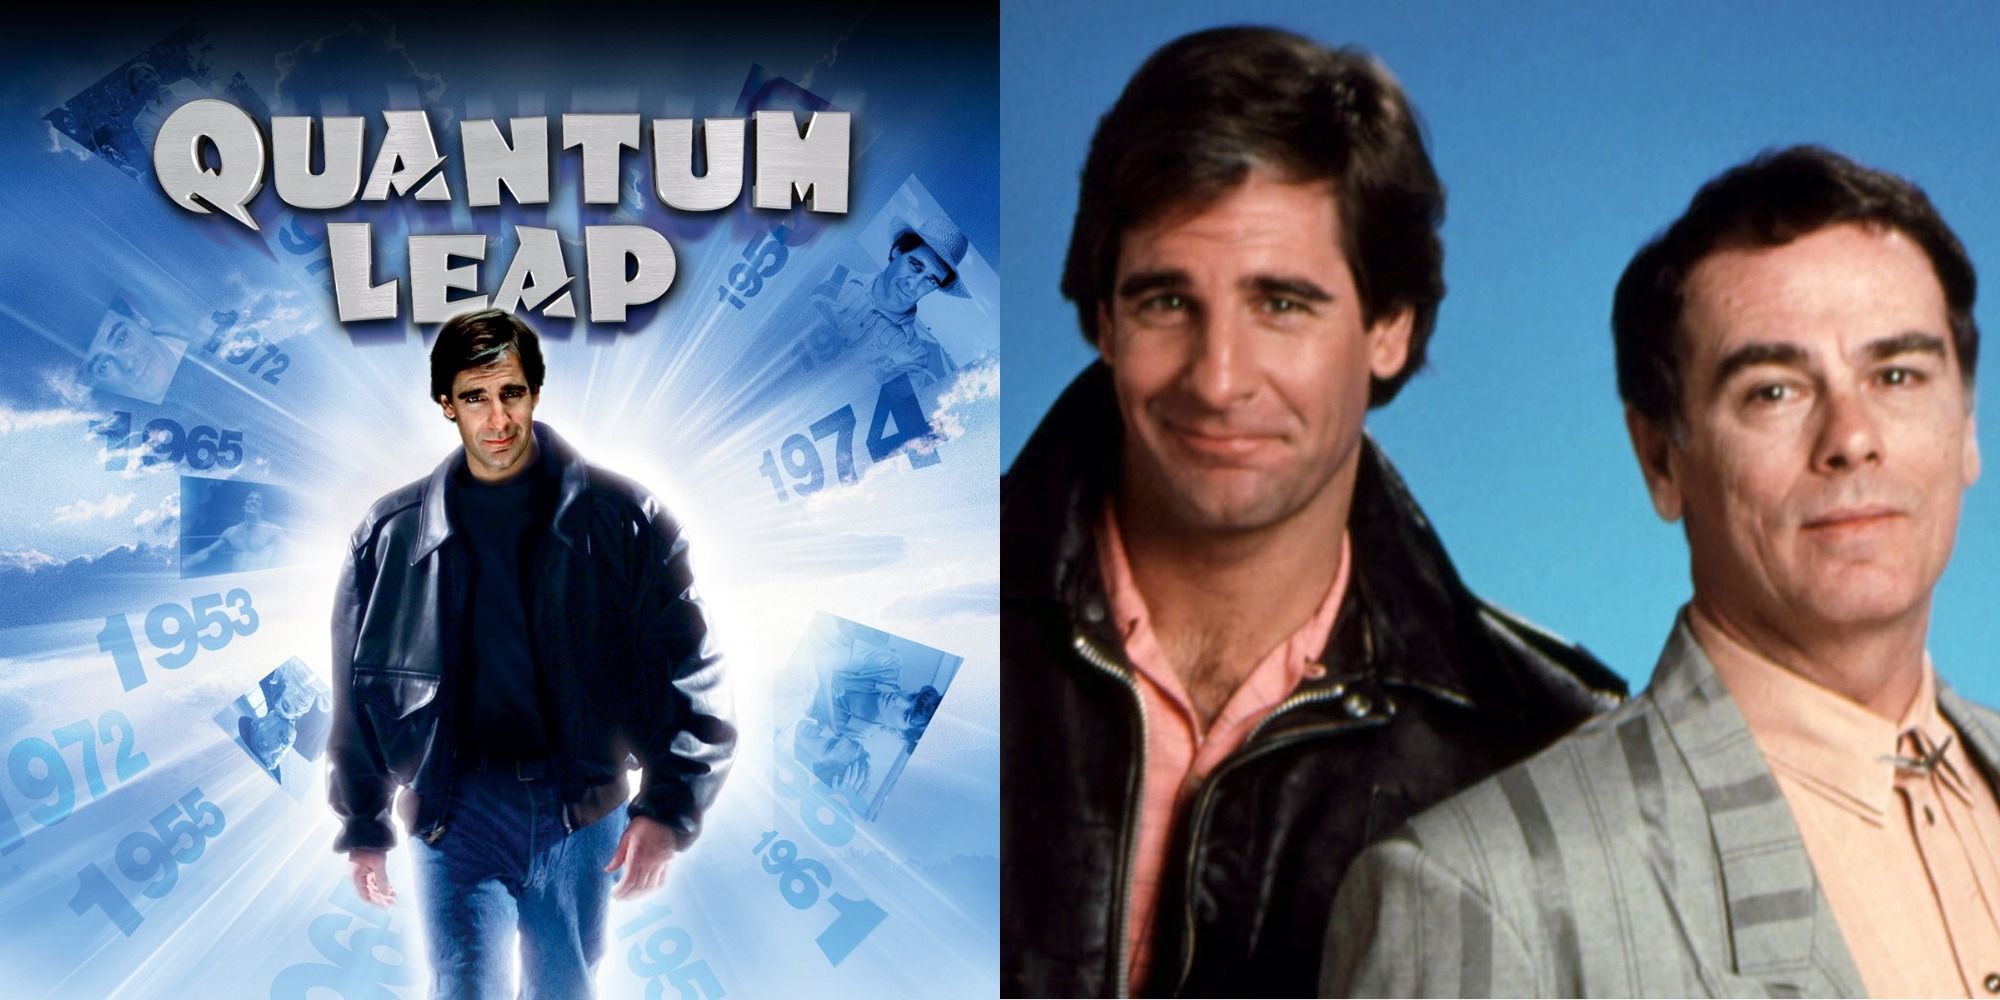 Split image showing a poster for Quantum Leap, and Sam and Al